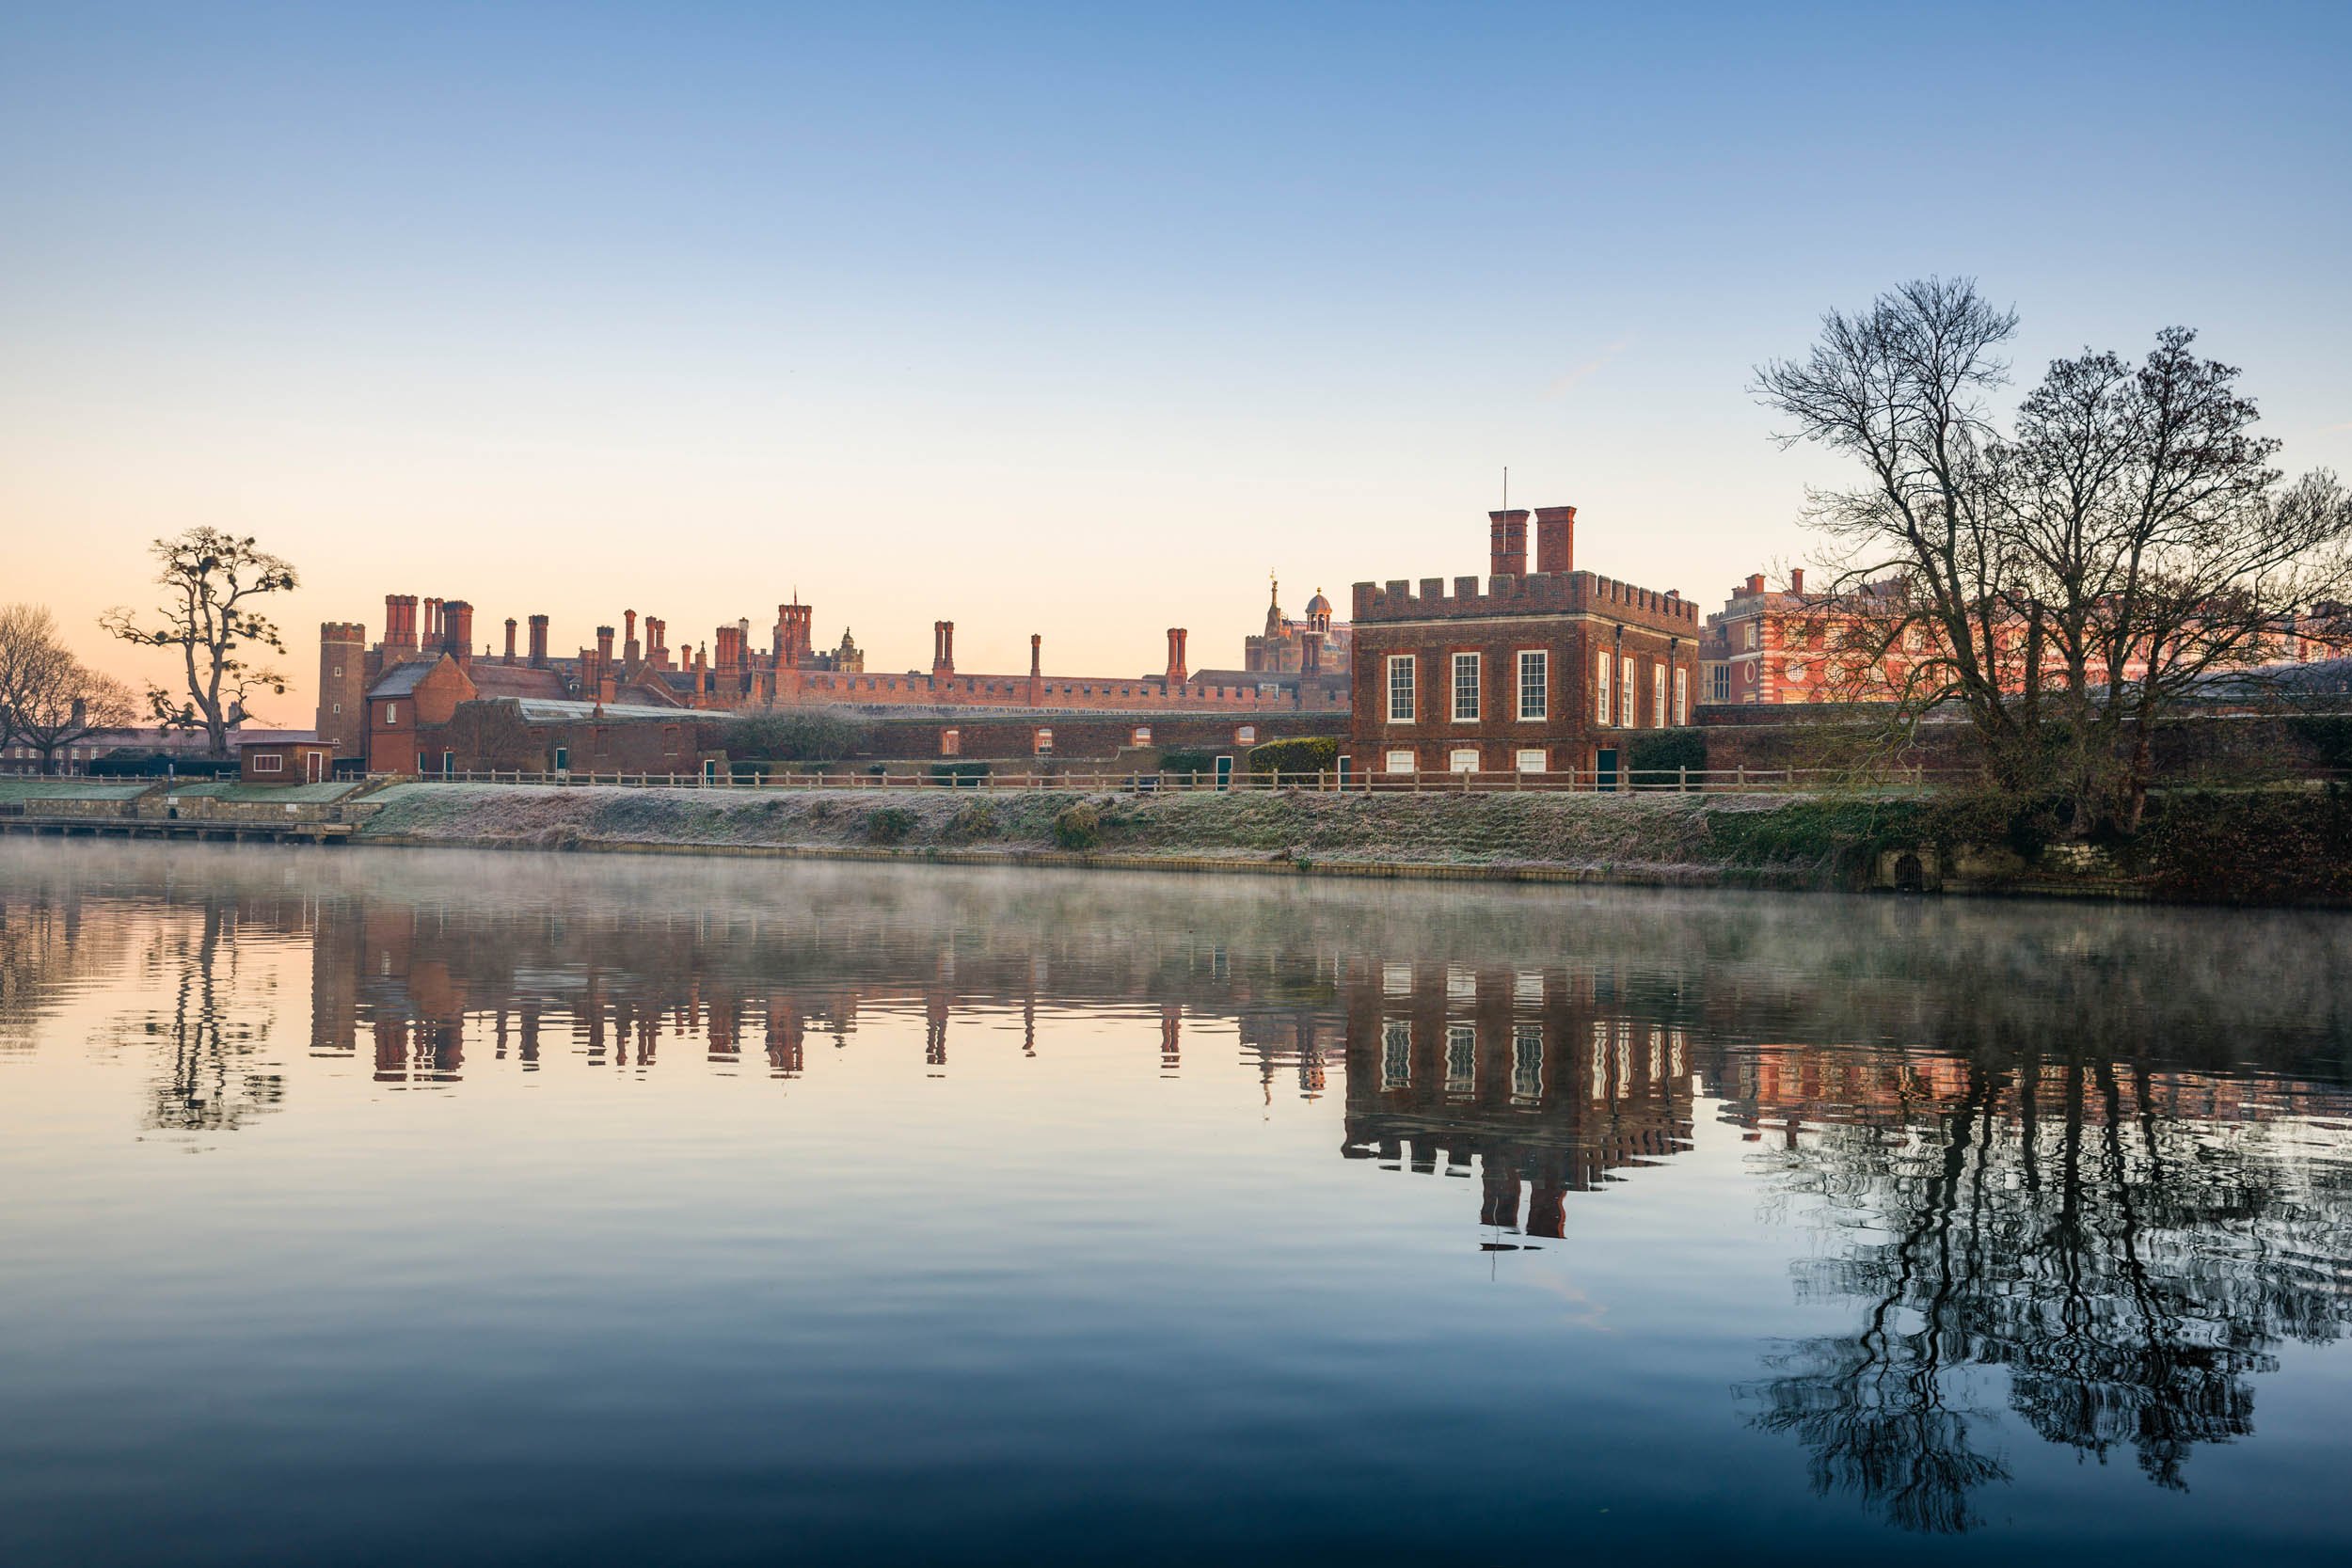 The Banqueting House and Hampton Court Palace with mist rising from the River Thames on a cold morning in the foreground.